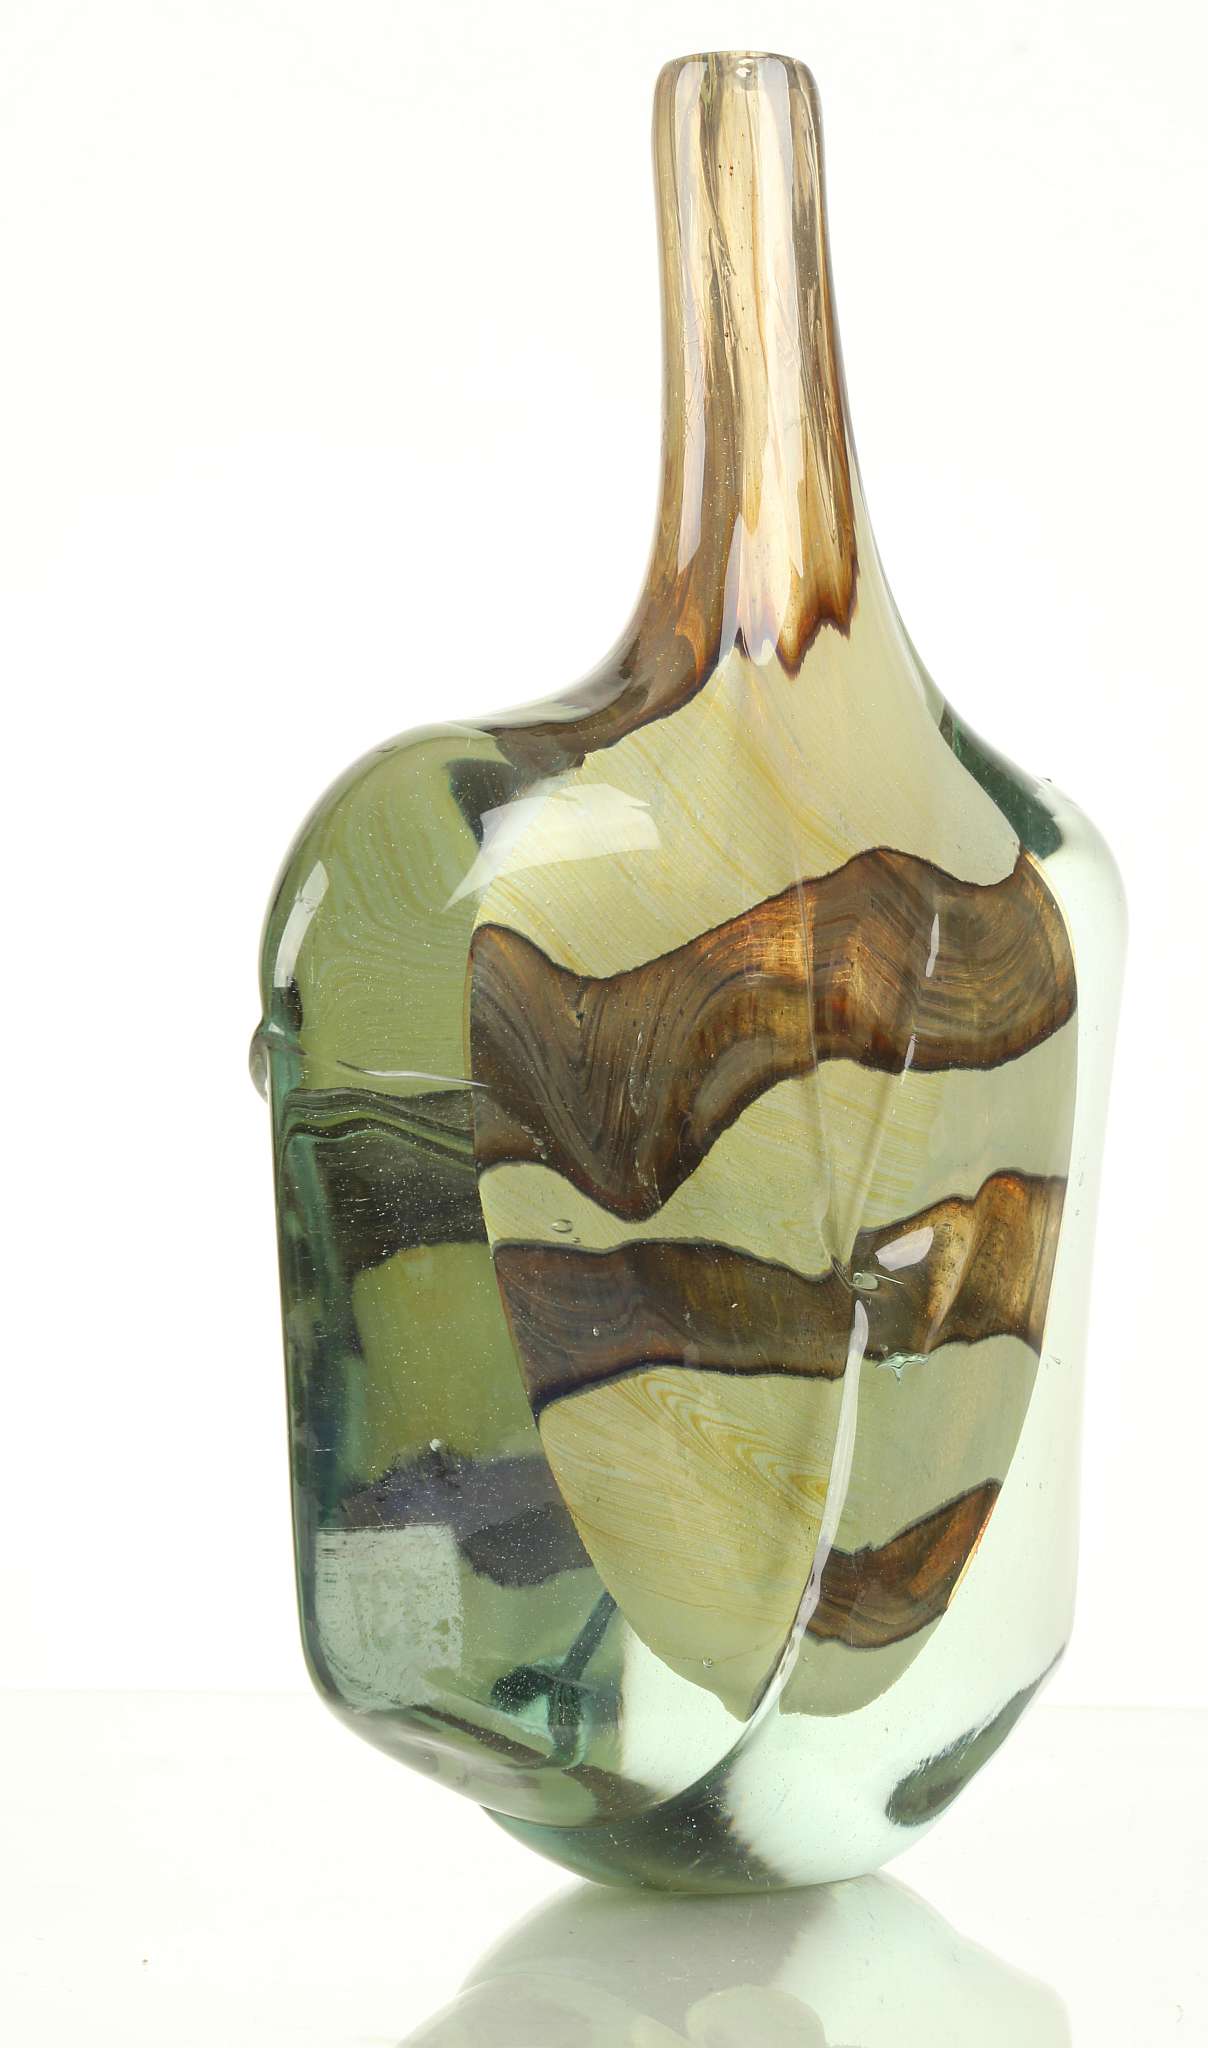 A MDINA FISH VASE, mid 20th century, green and brown clear cased glass, (21 x 27cm high) - Image 3 of 5